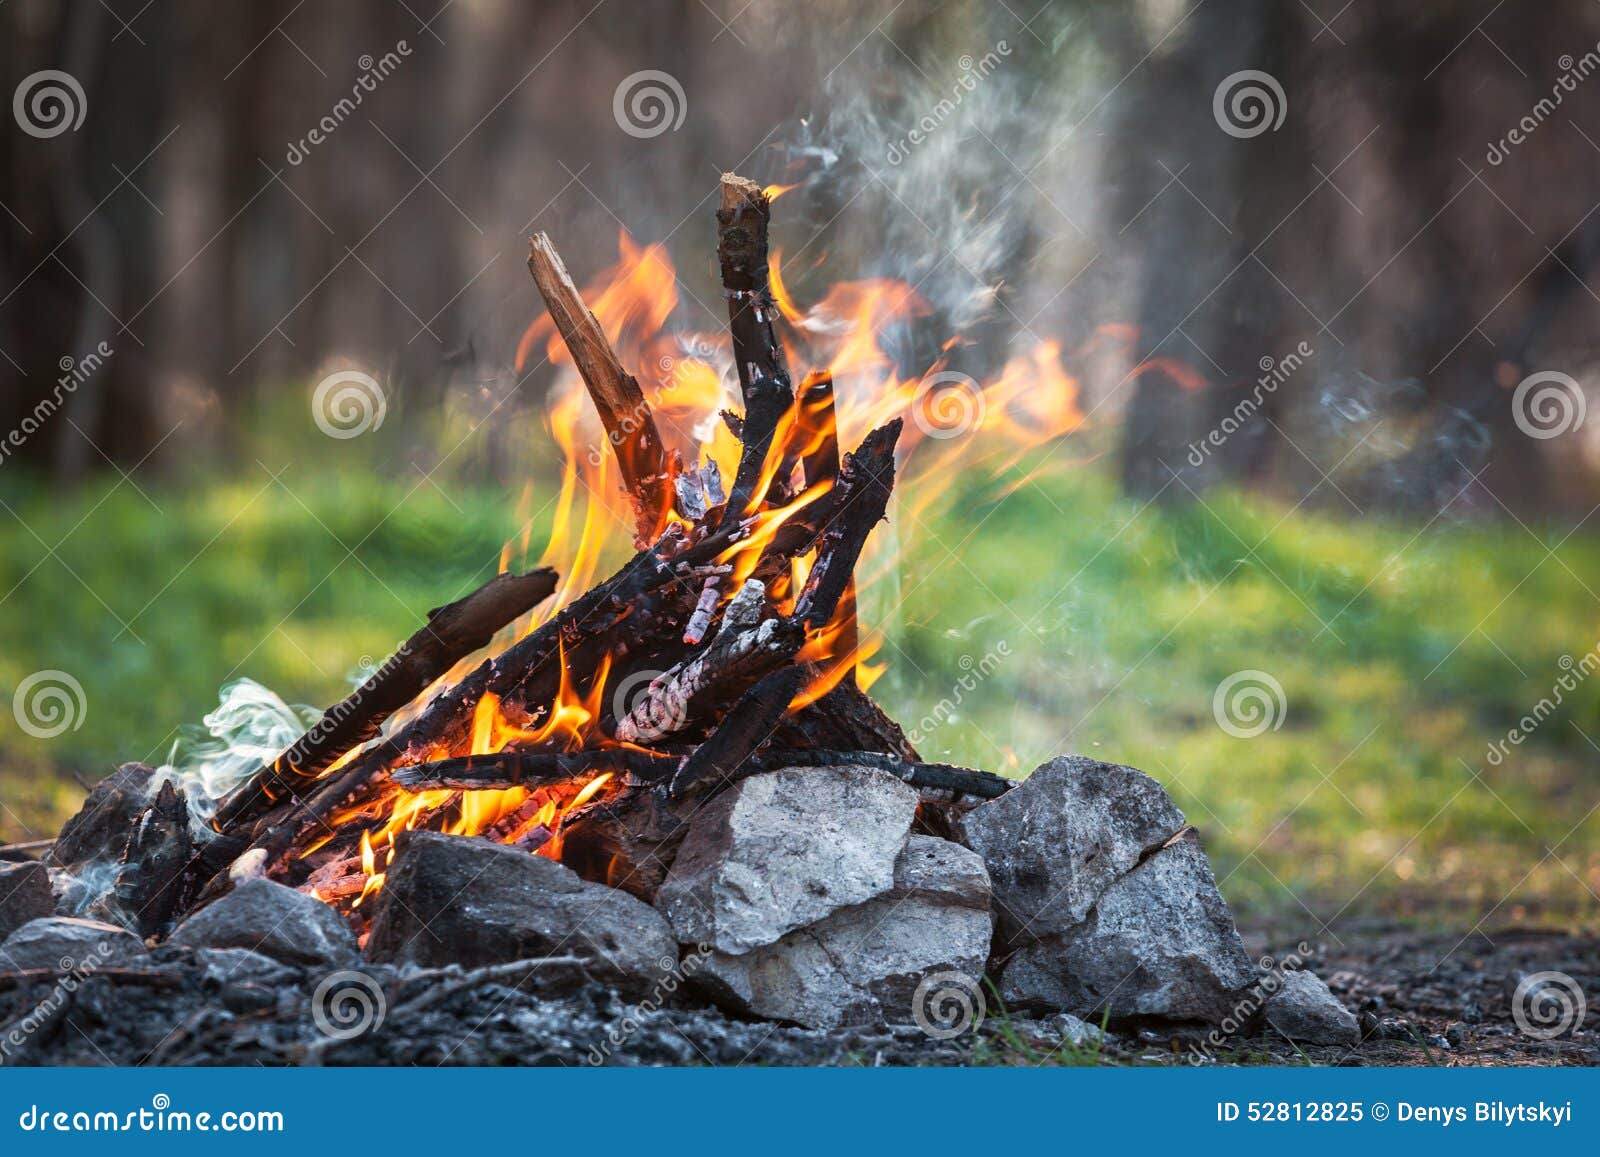 Bonfire in the Spring Forest. Coals of Fire Stock Image - Image of ...